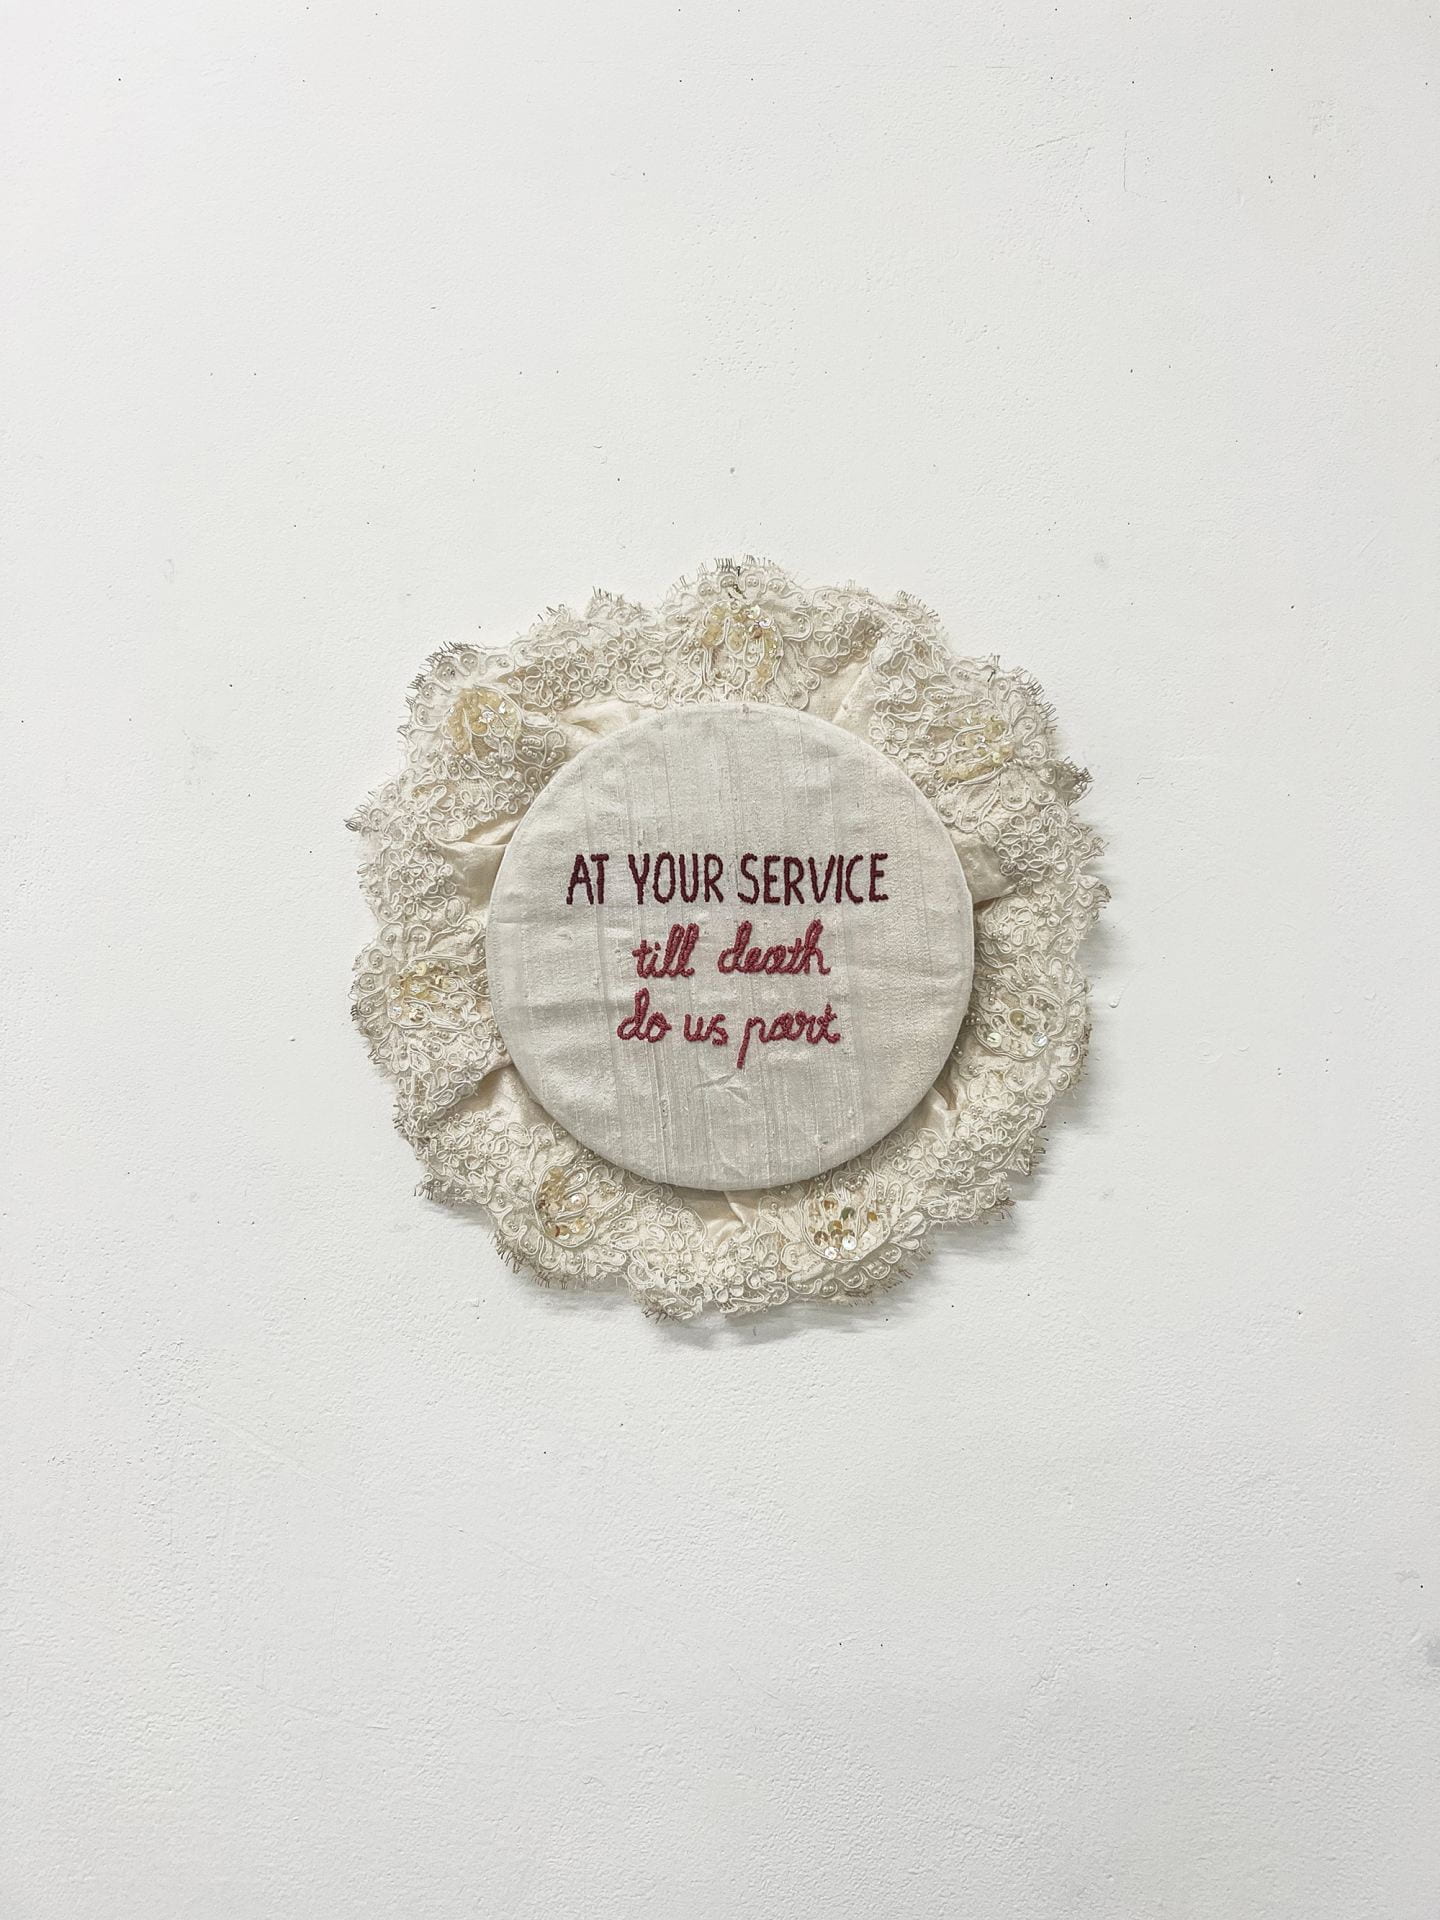 photograph of embroidery work hung on wall